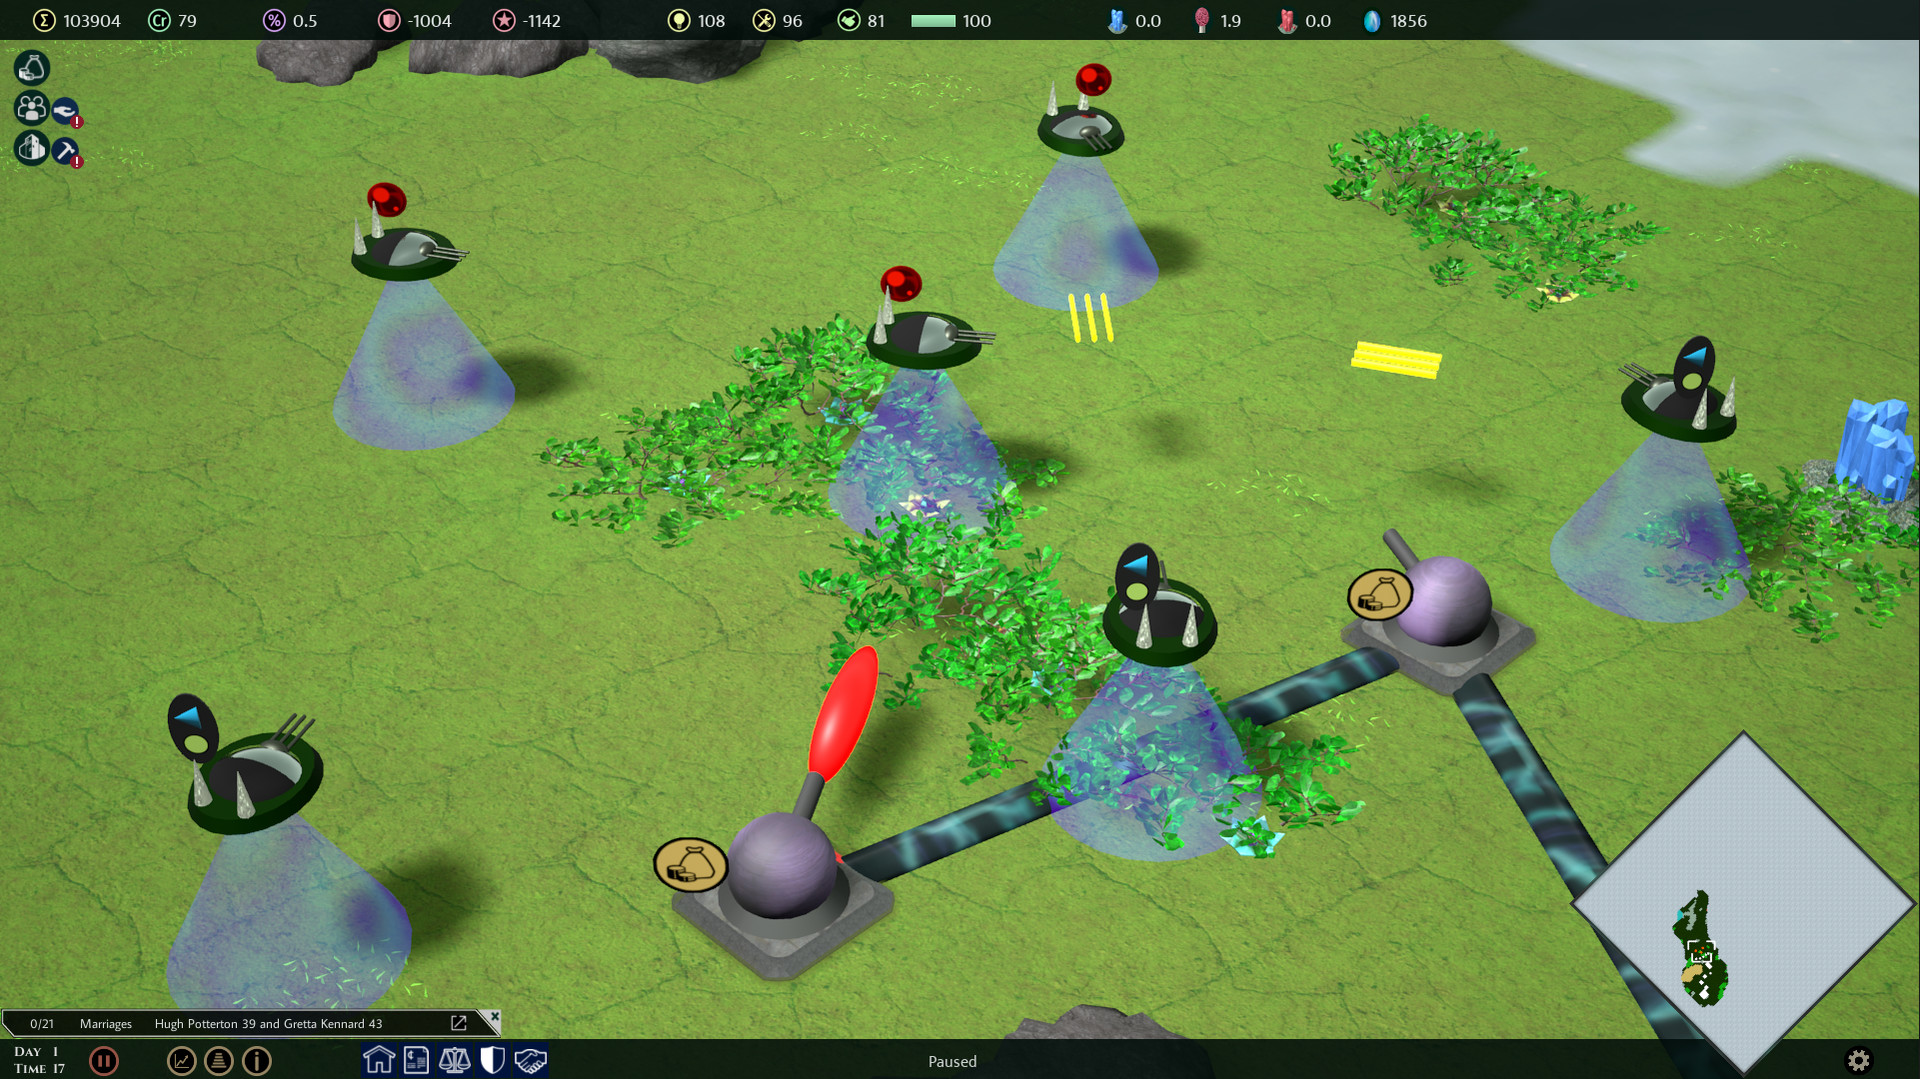 download space colonization games pc